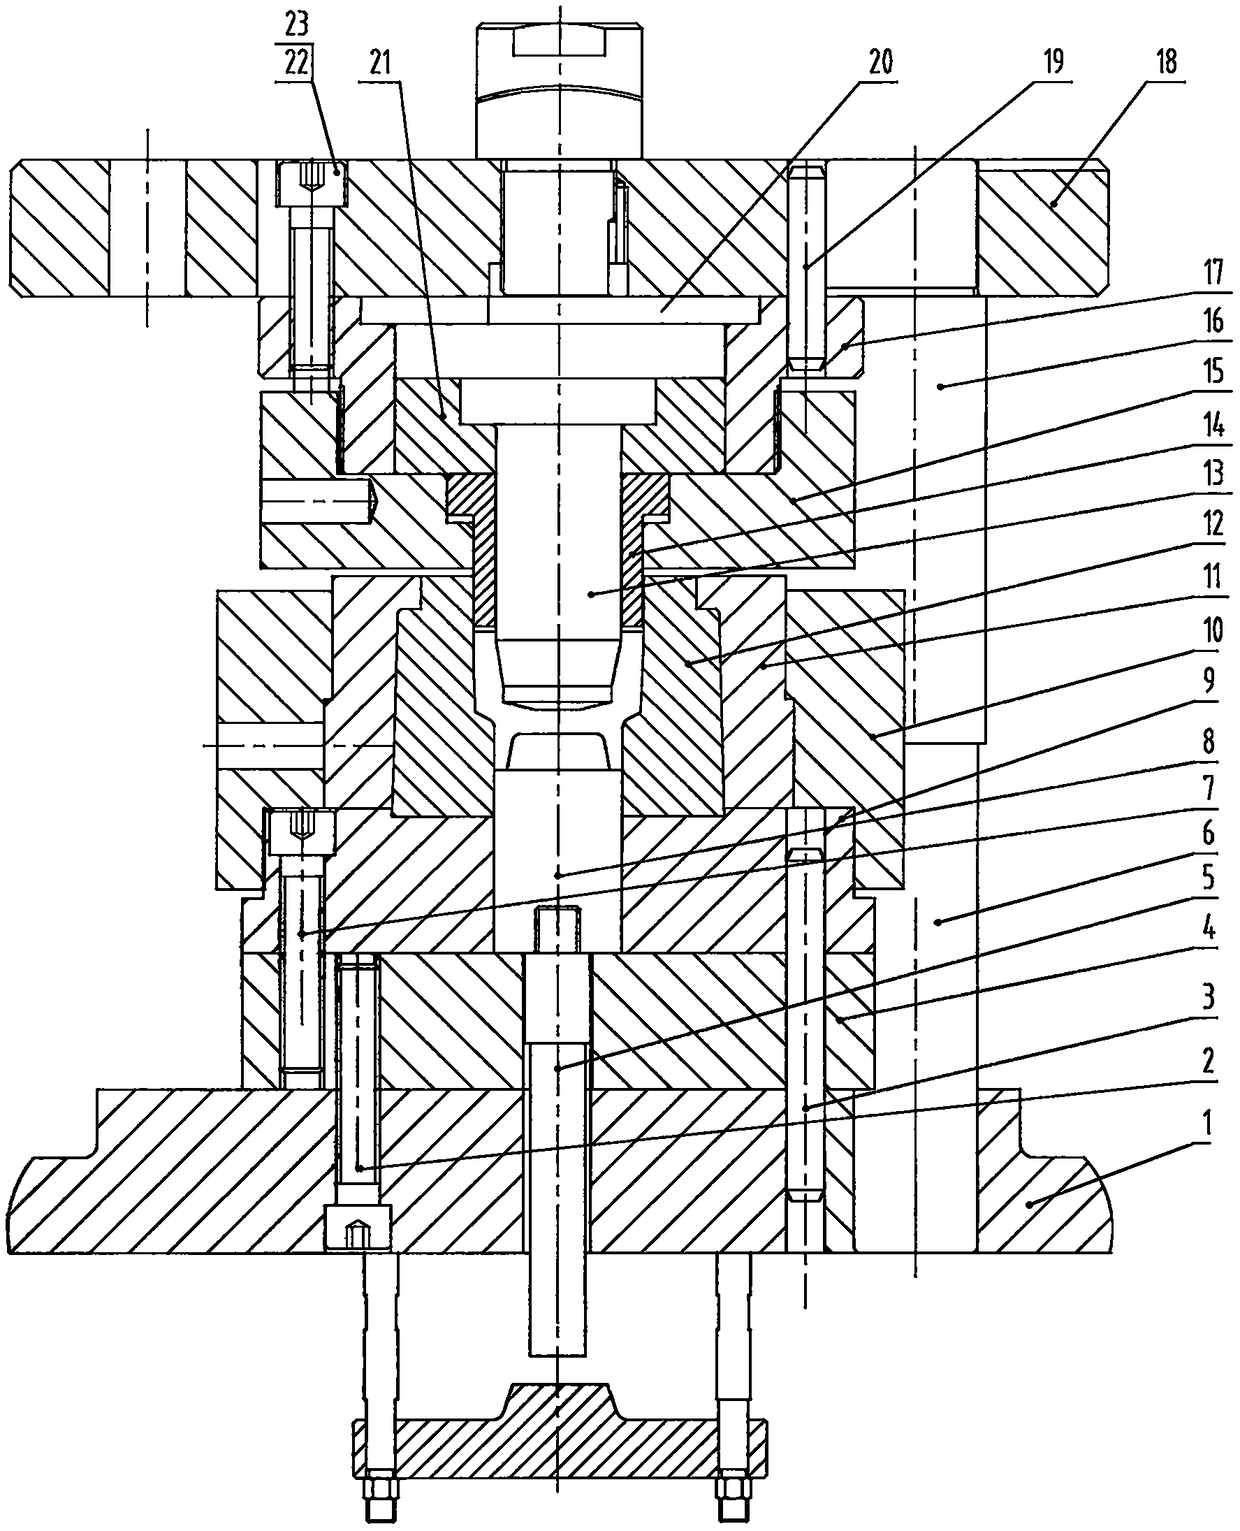 Synchronous extrusion forming mold for H-shaped steel connectors different in wall thickness